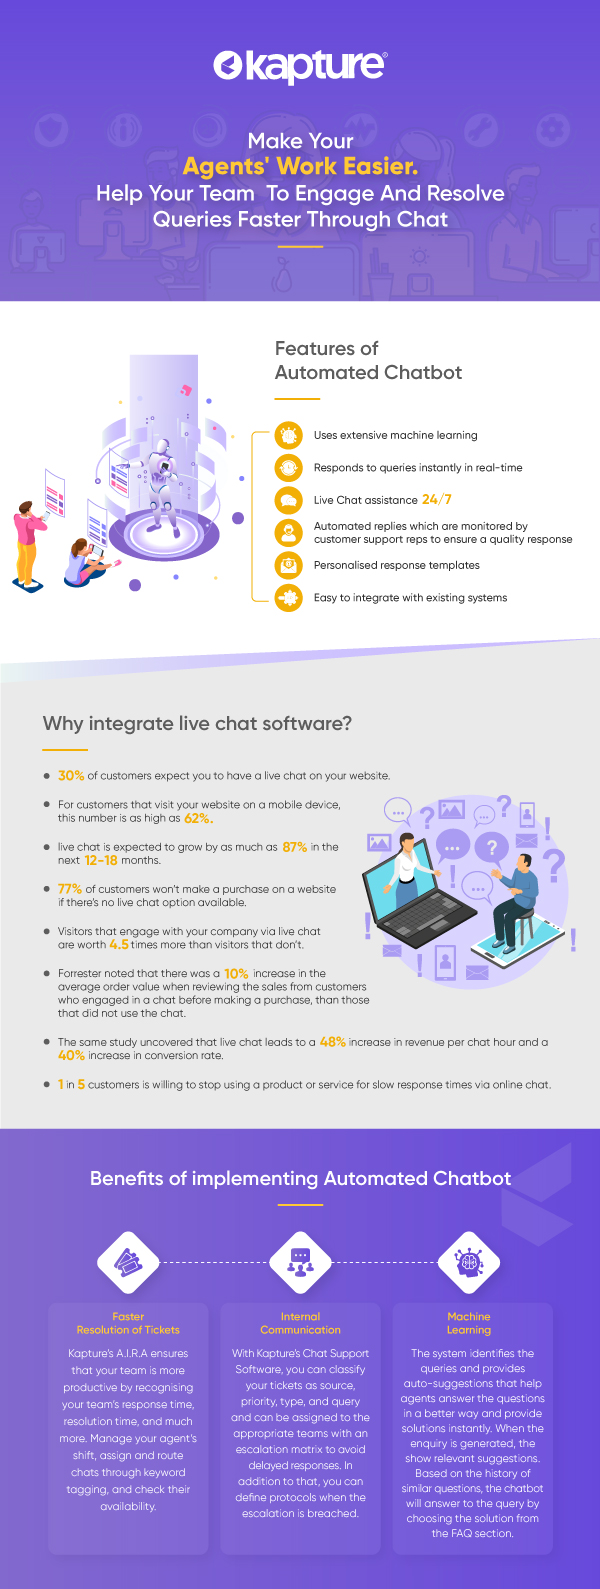 Why Integrate Live Chat Software?